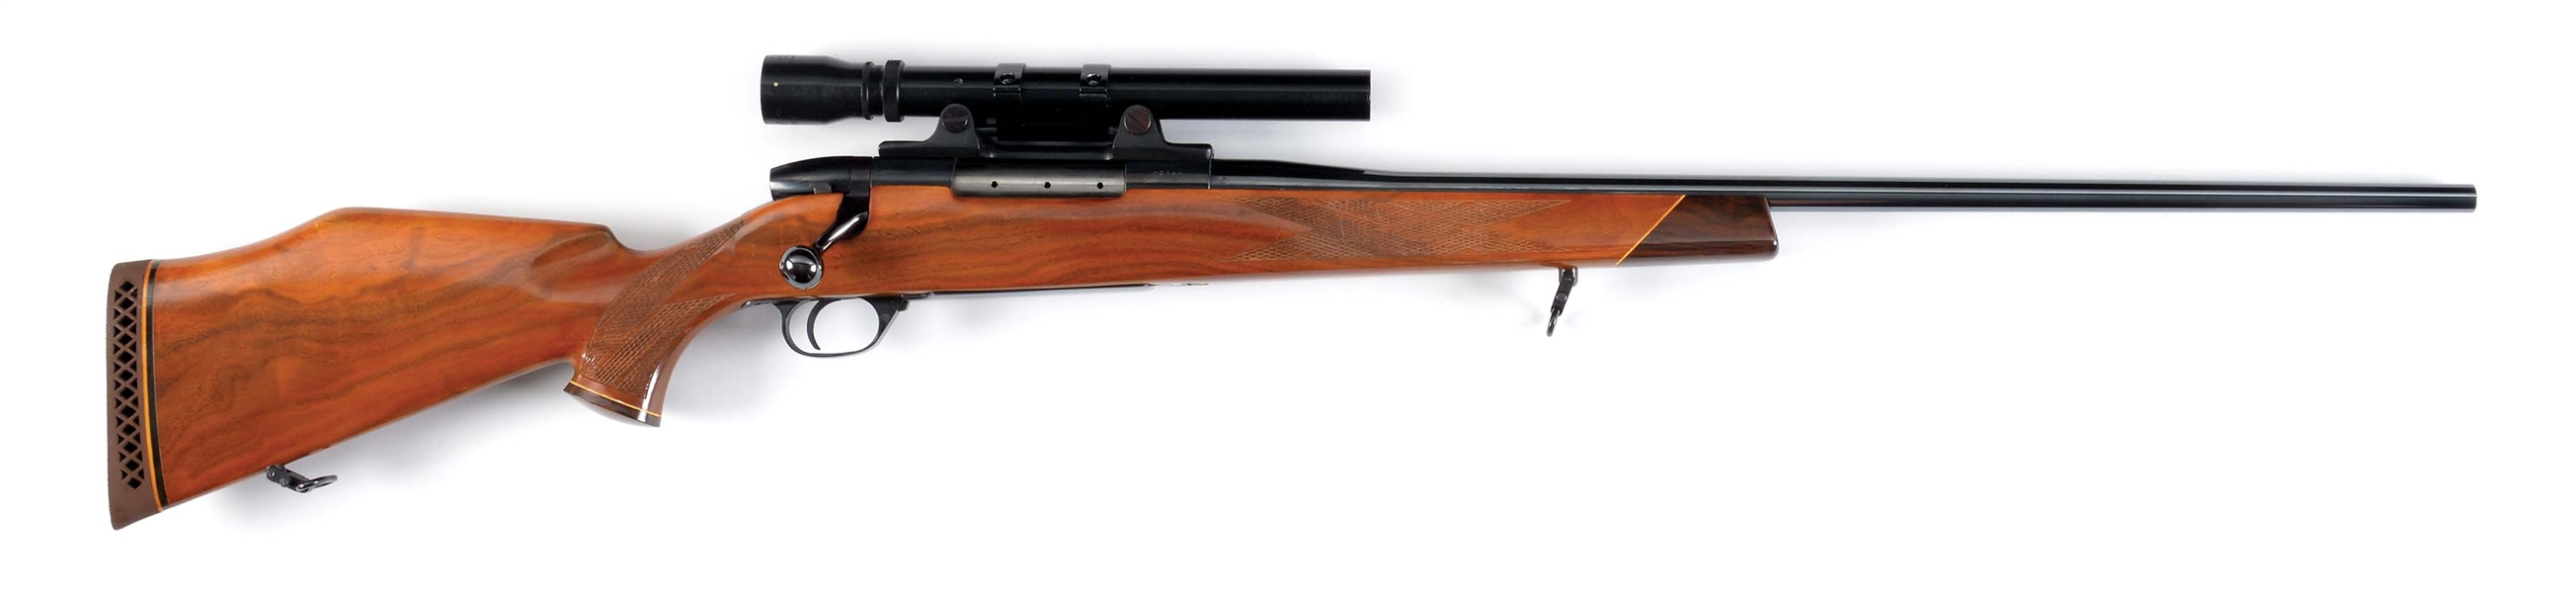 (M) WEATHERBY MK V BOLT ACTION RIFLE WITH SCOPE AND BOX.